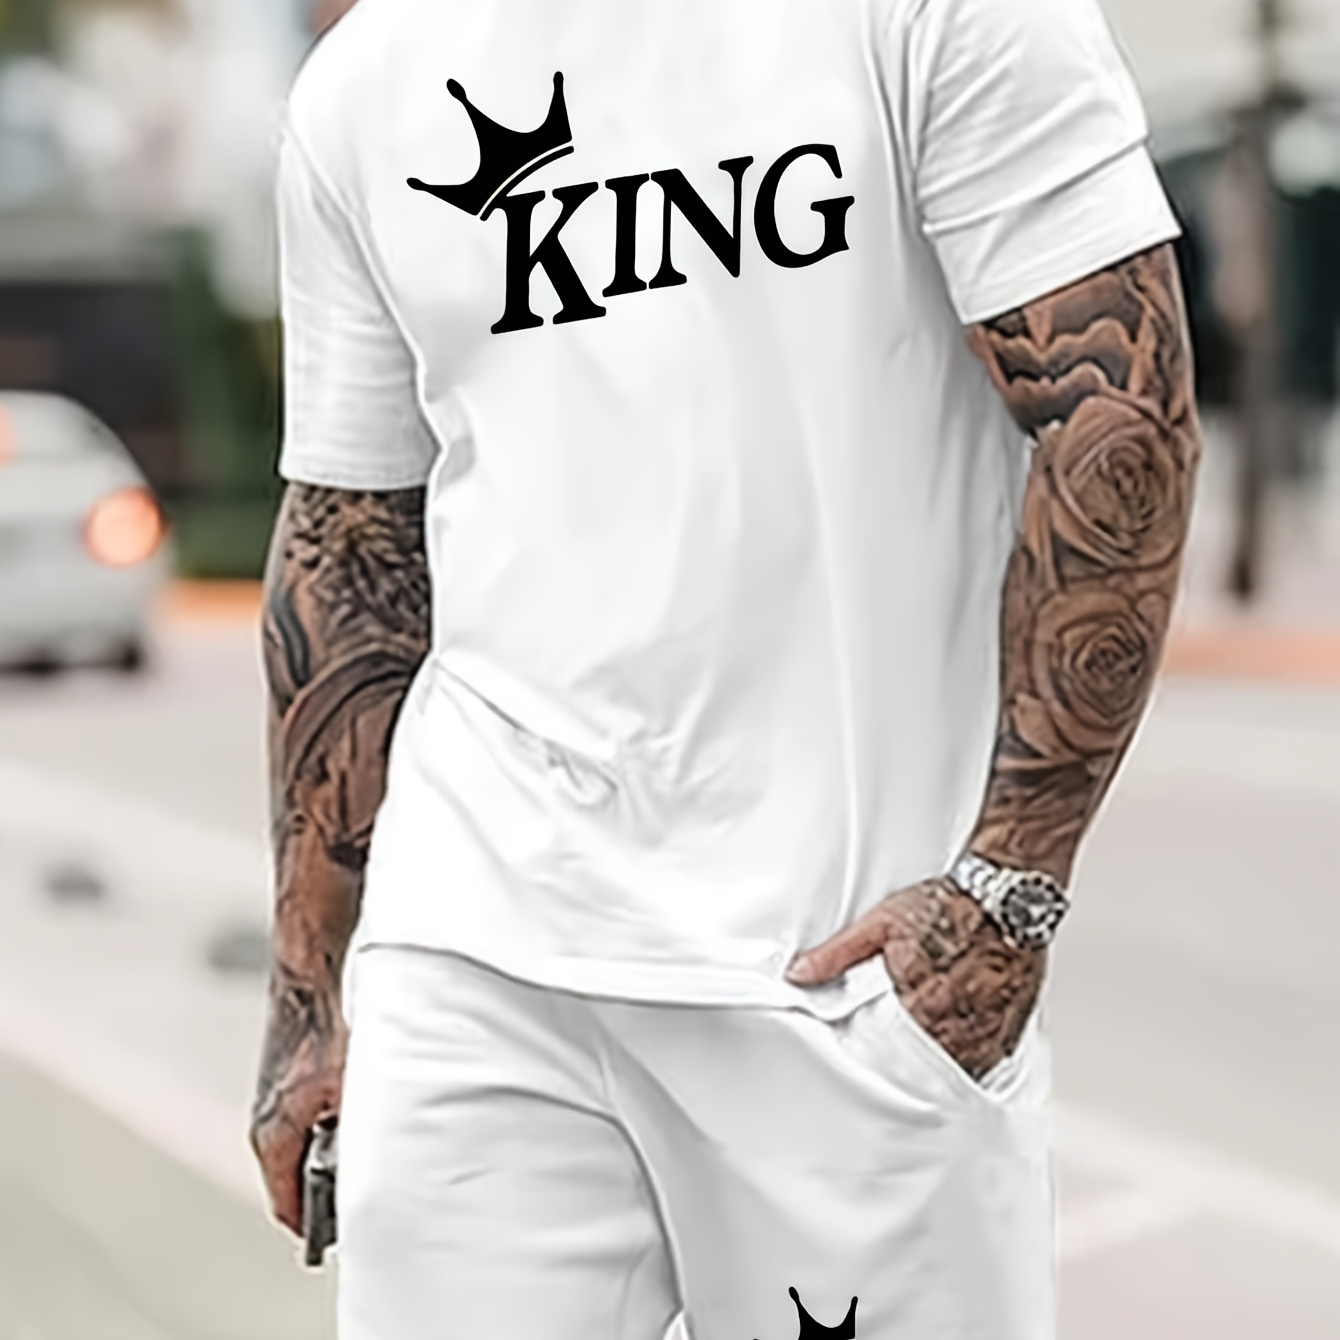 

King Pattern 2pcs Outfits For Men, Casual Crew Neck Short Sleeve T-shirt And Elastic Waist Shorts Set For Summer, Men's Clothing Loungewear Vacation Workout